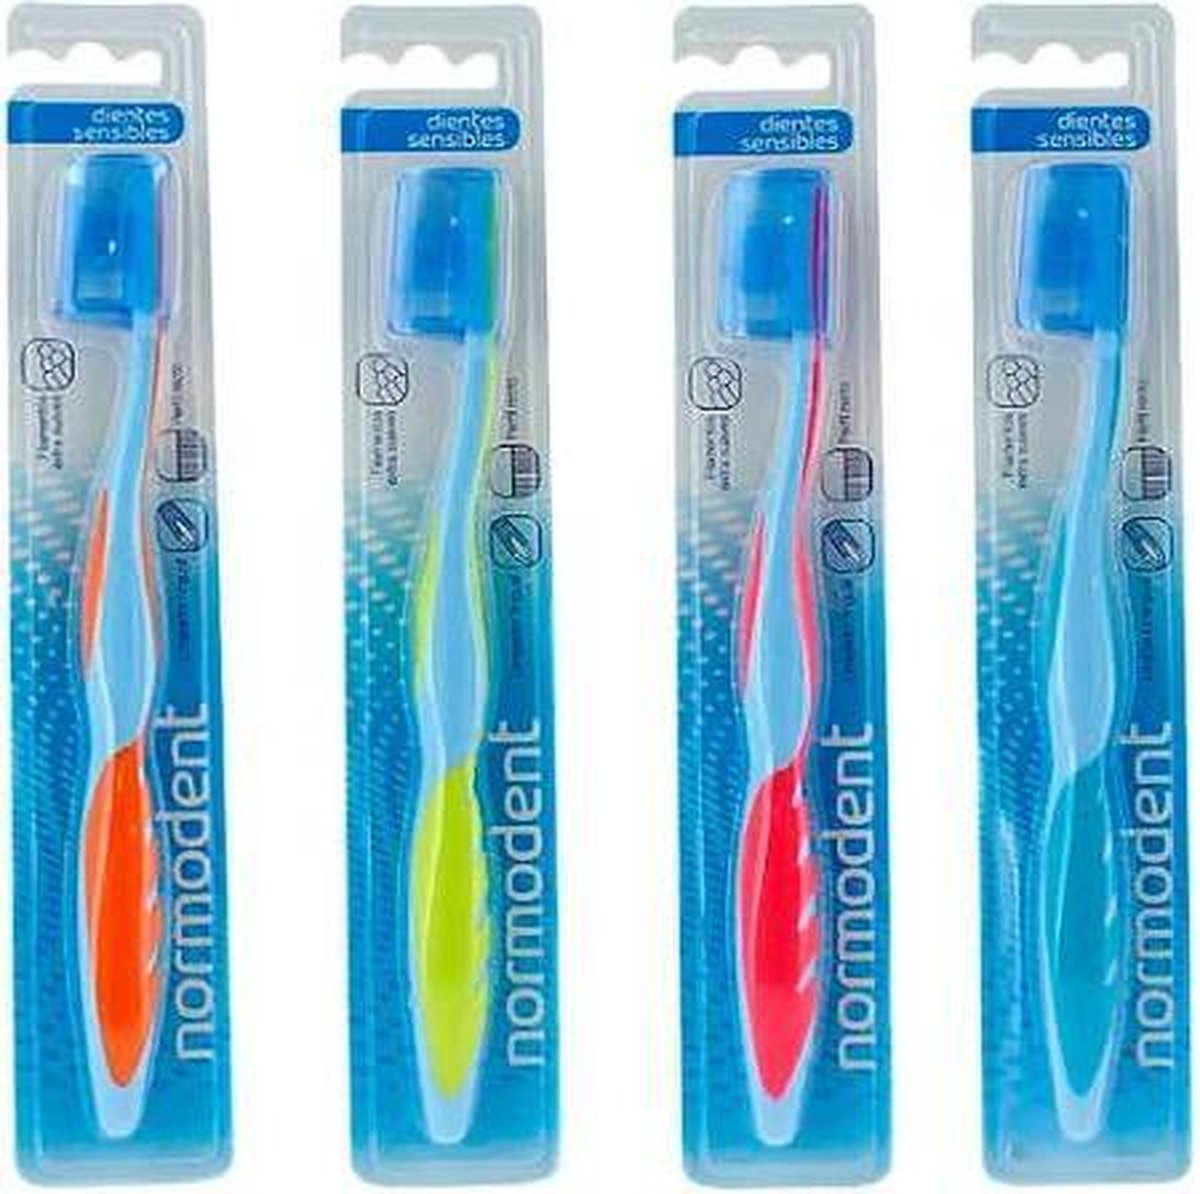 Normon Normodent Toothbrush For Sensitive Teeth 1 Pc